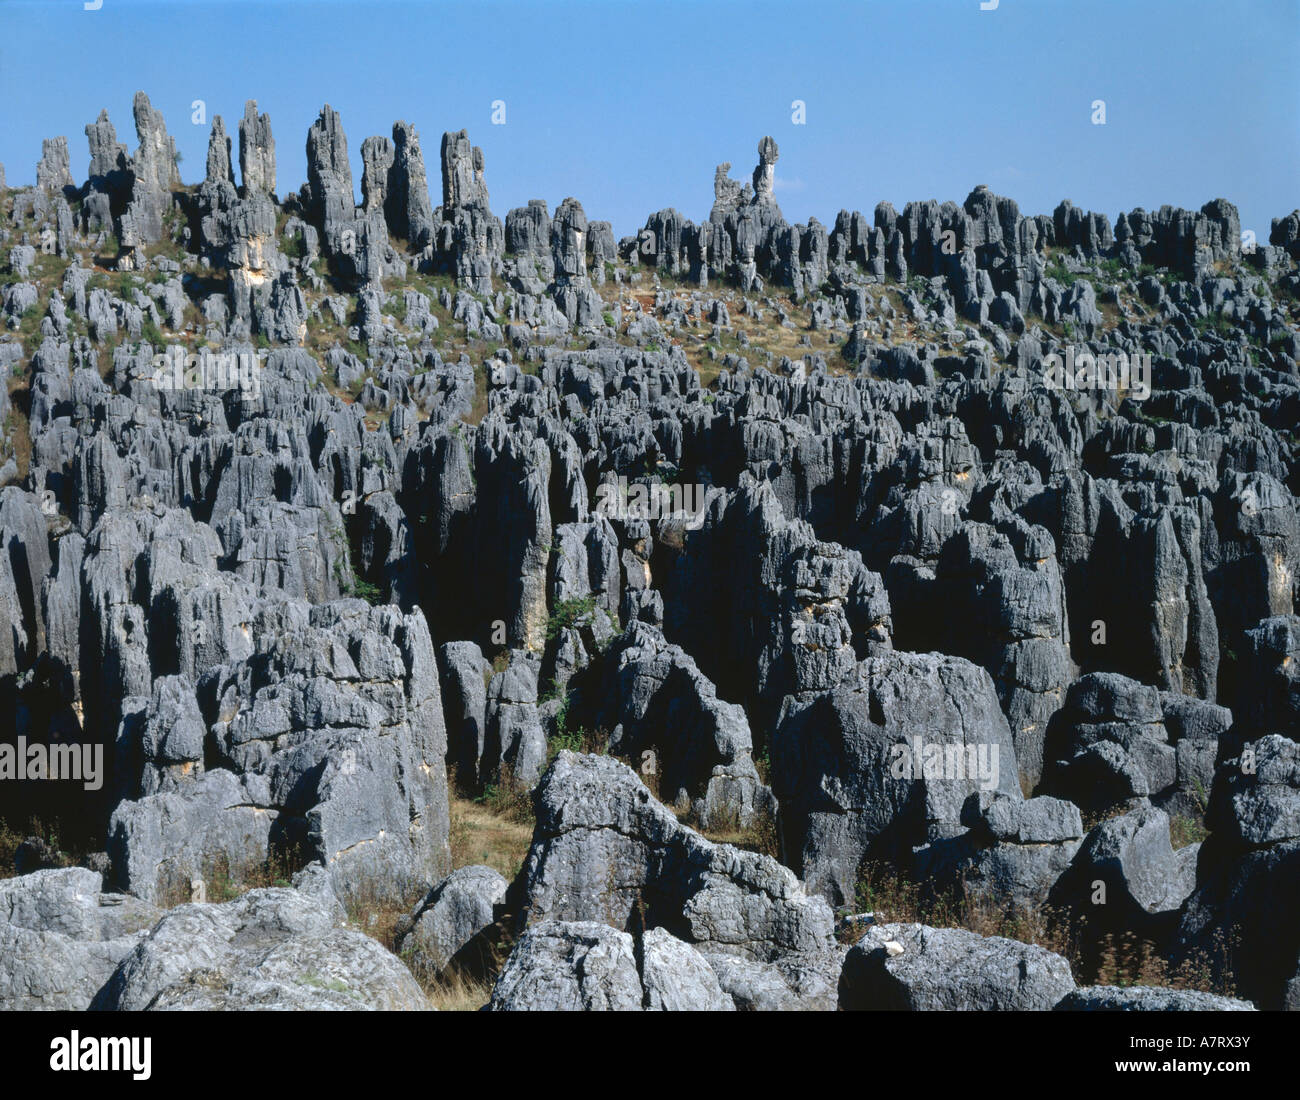 Rock formations on landscape, China Stock Photo